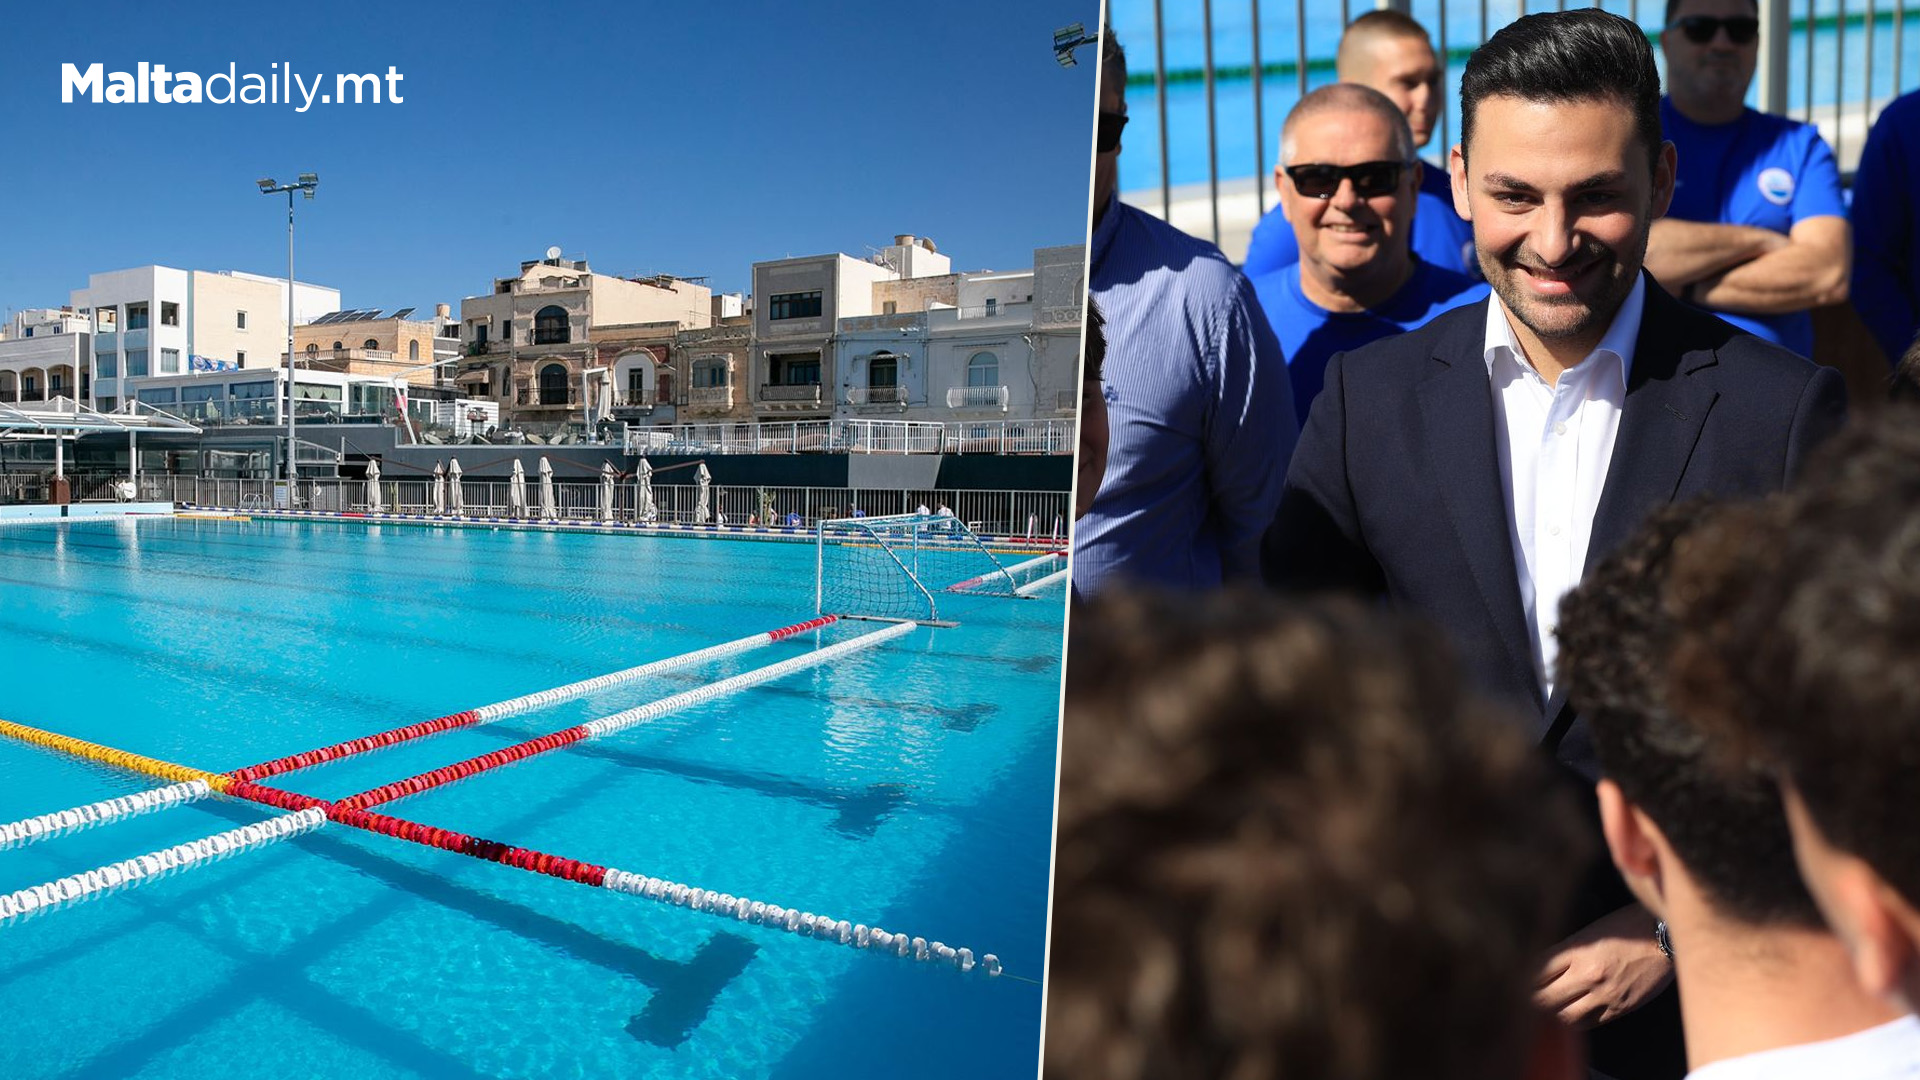 €300,000 Investment Into Waterpolo Pool In Birżebbuġa